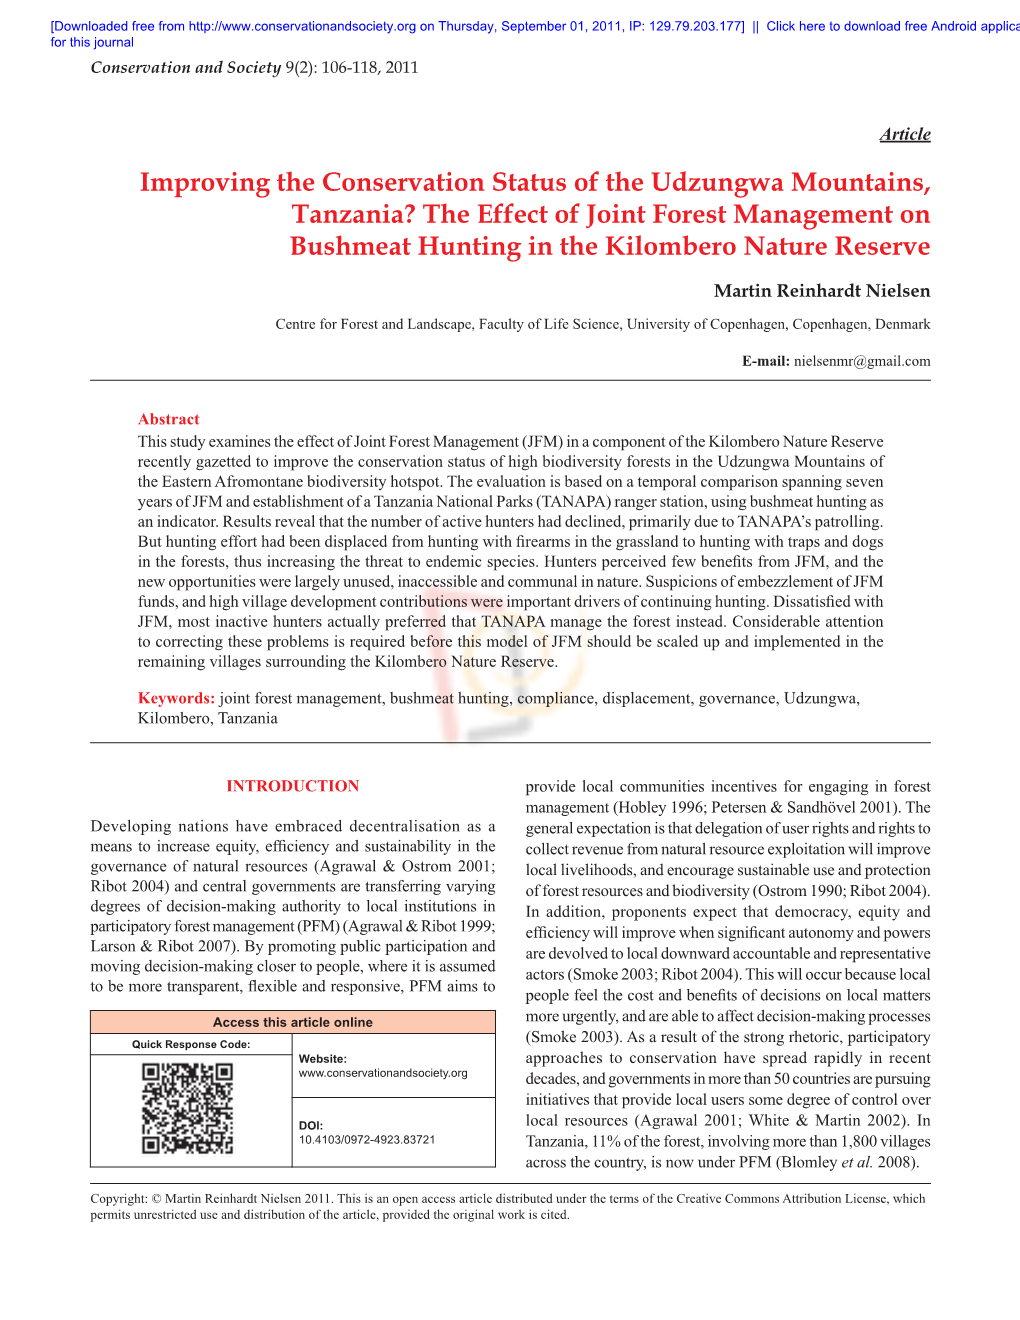 Improving the Conservation Status of the Udzungwa Mountains, Tanzania? the Effect of Joint Forest Management on Bushmeat Hunting in the Kilombero Nature Reserve